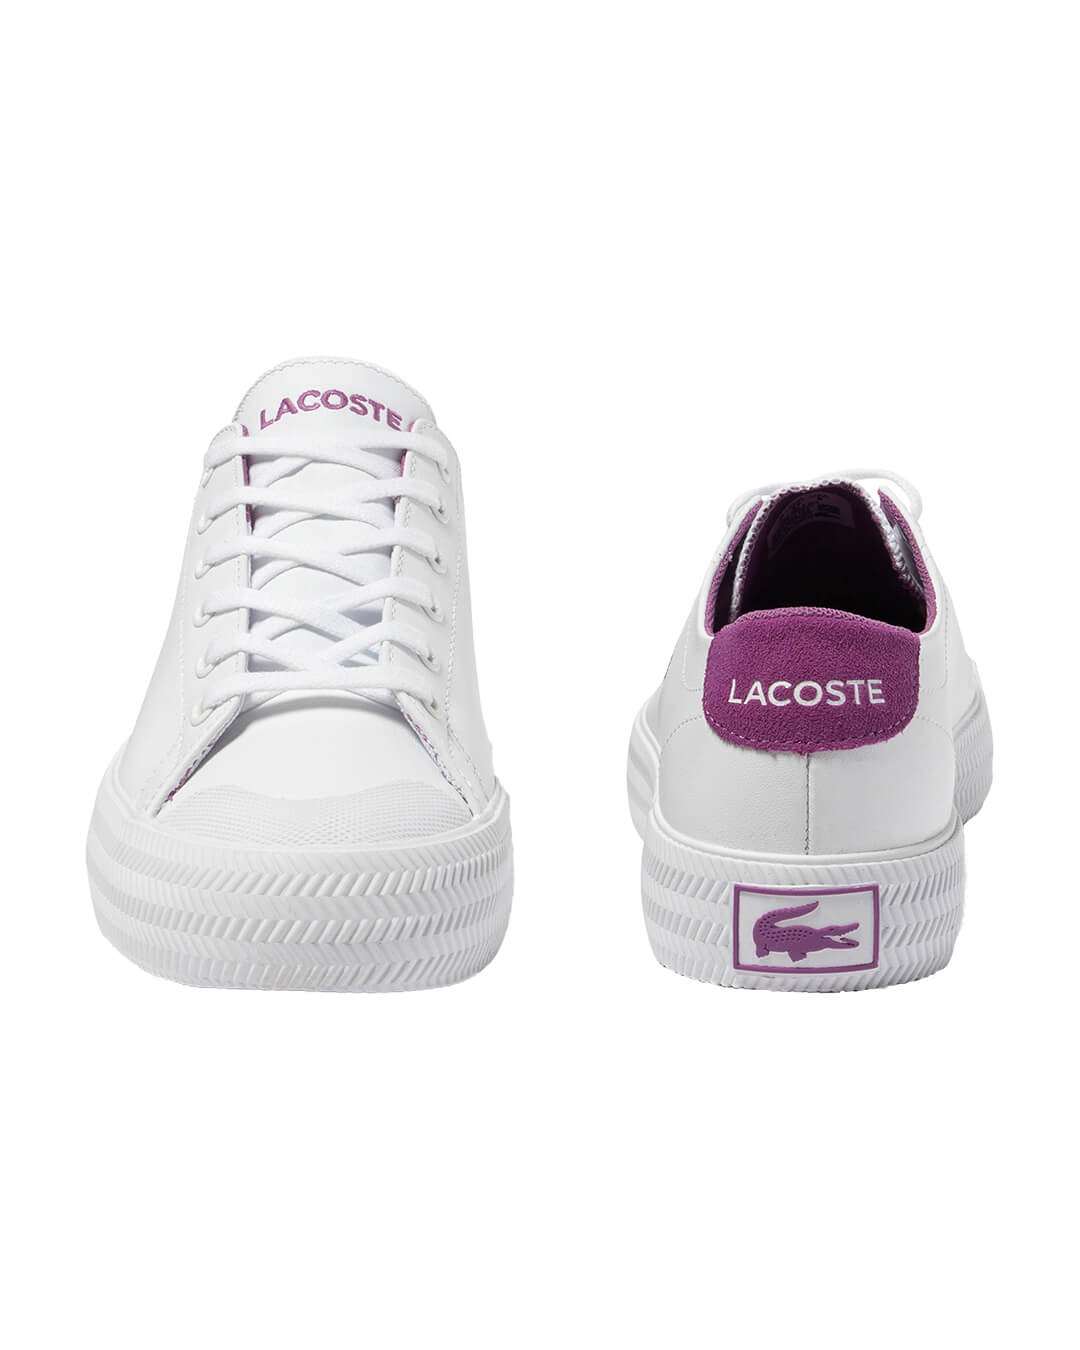 Lacoste Shoes Lacoste Gripshot Textile Heel Pop White Sneakers